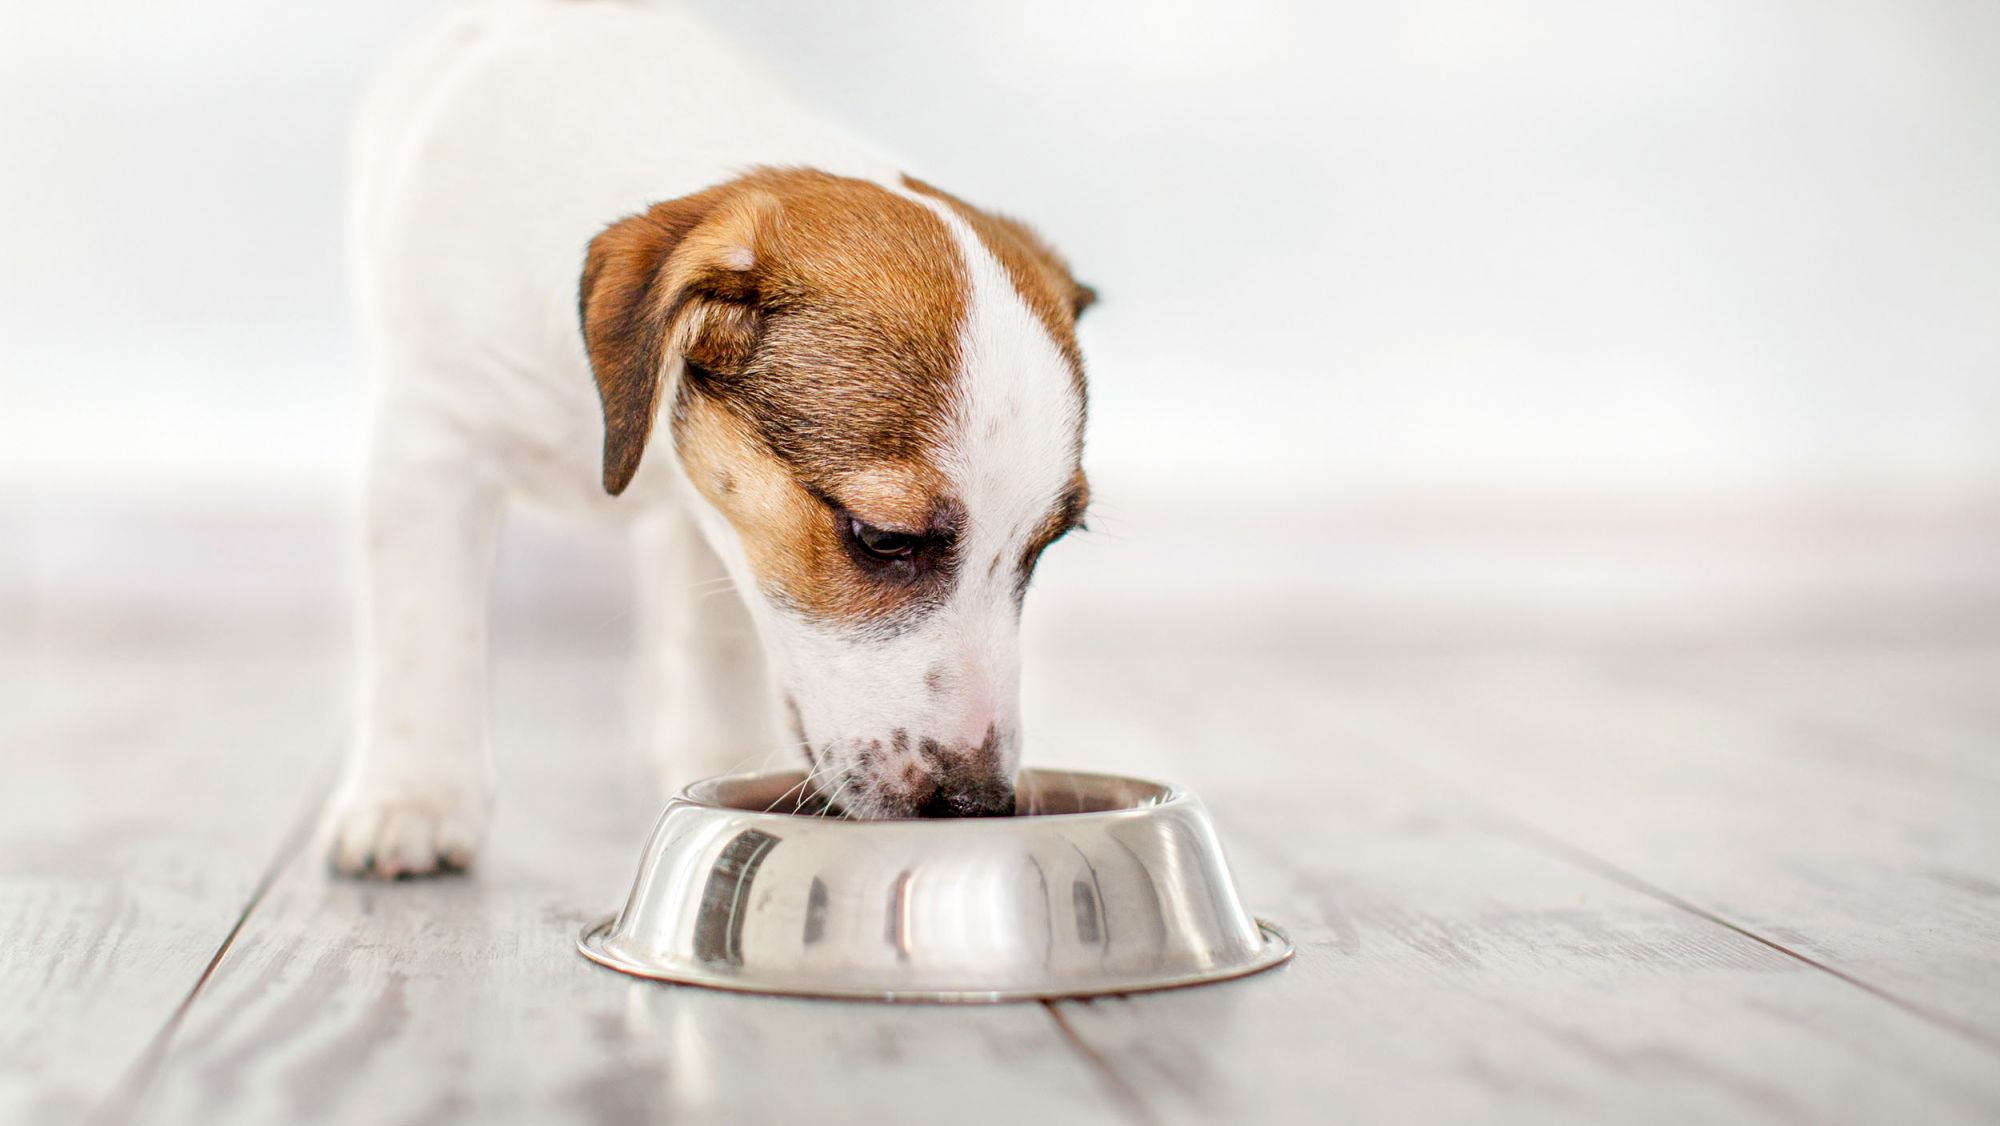 Puppy Jack Russell standing indoors on a wooden floor eating from a silver bowl